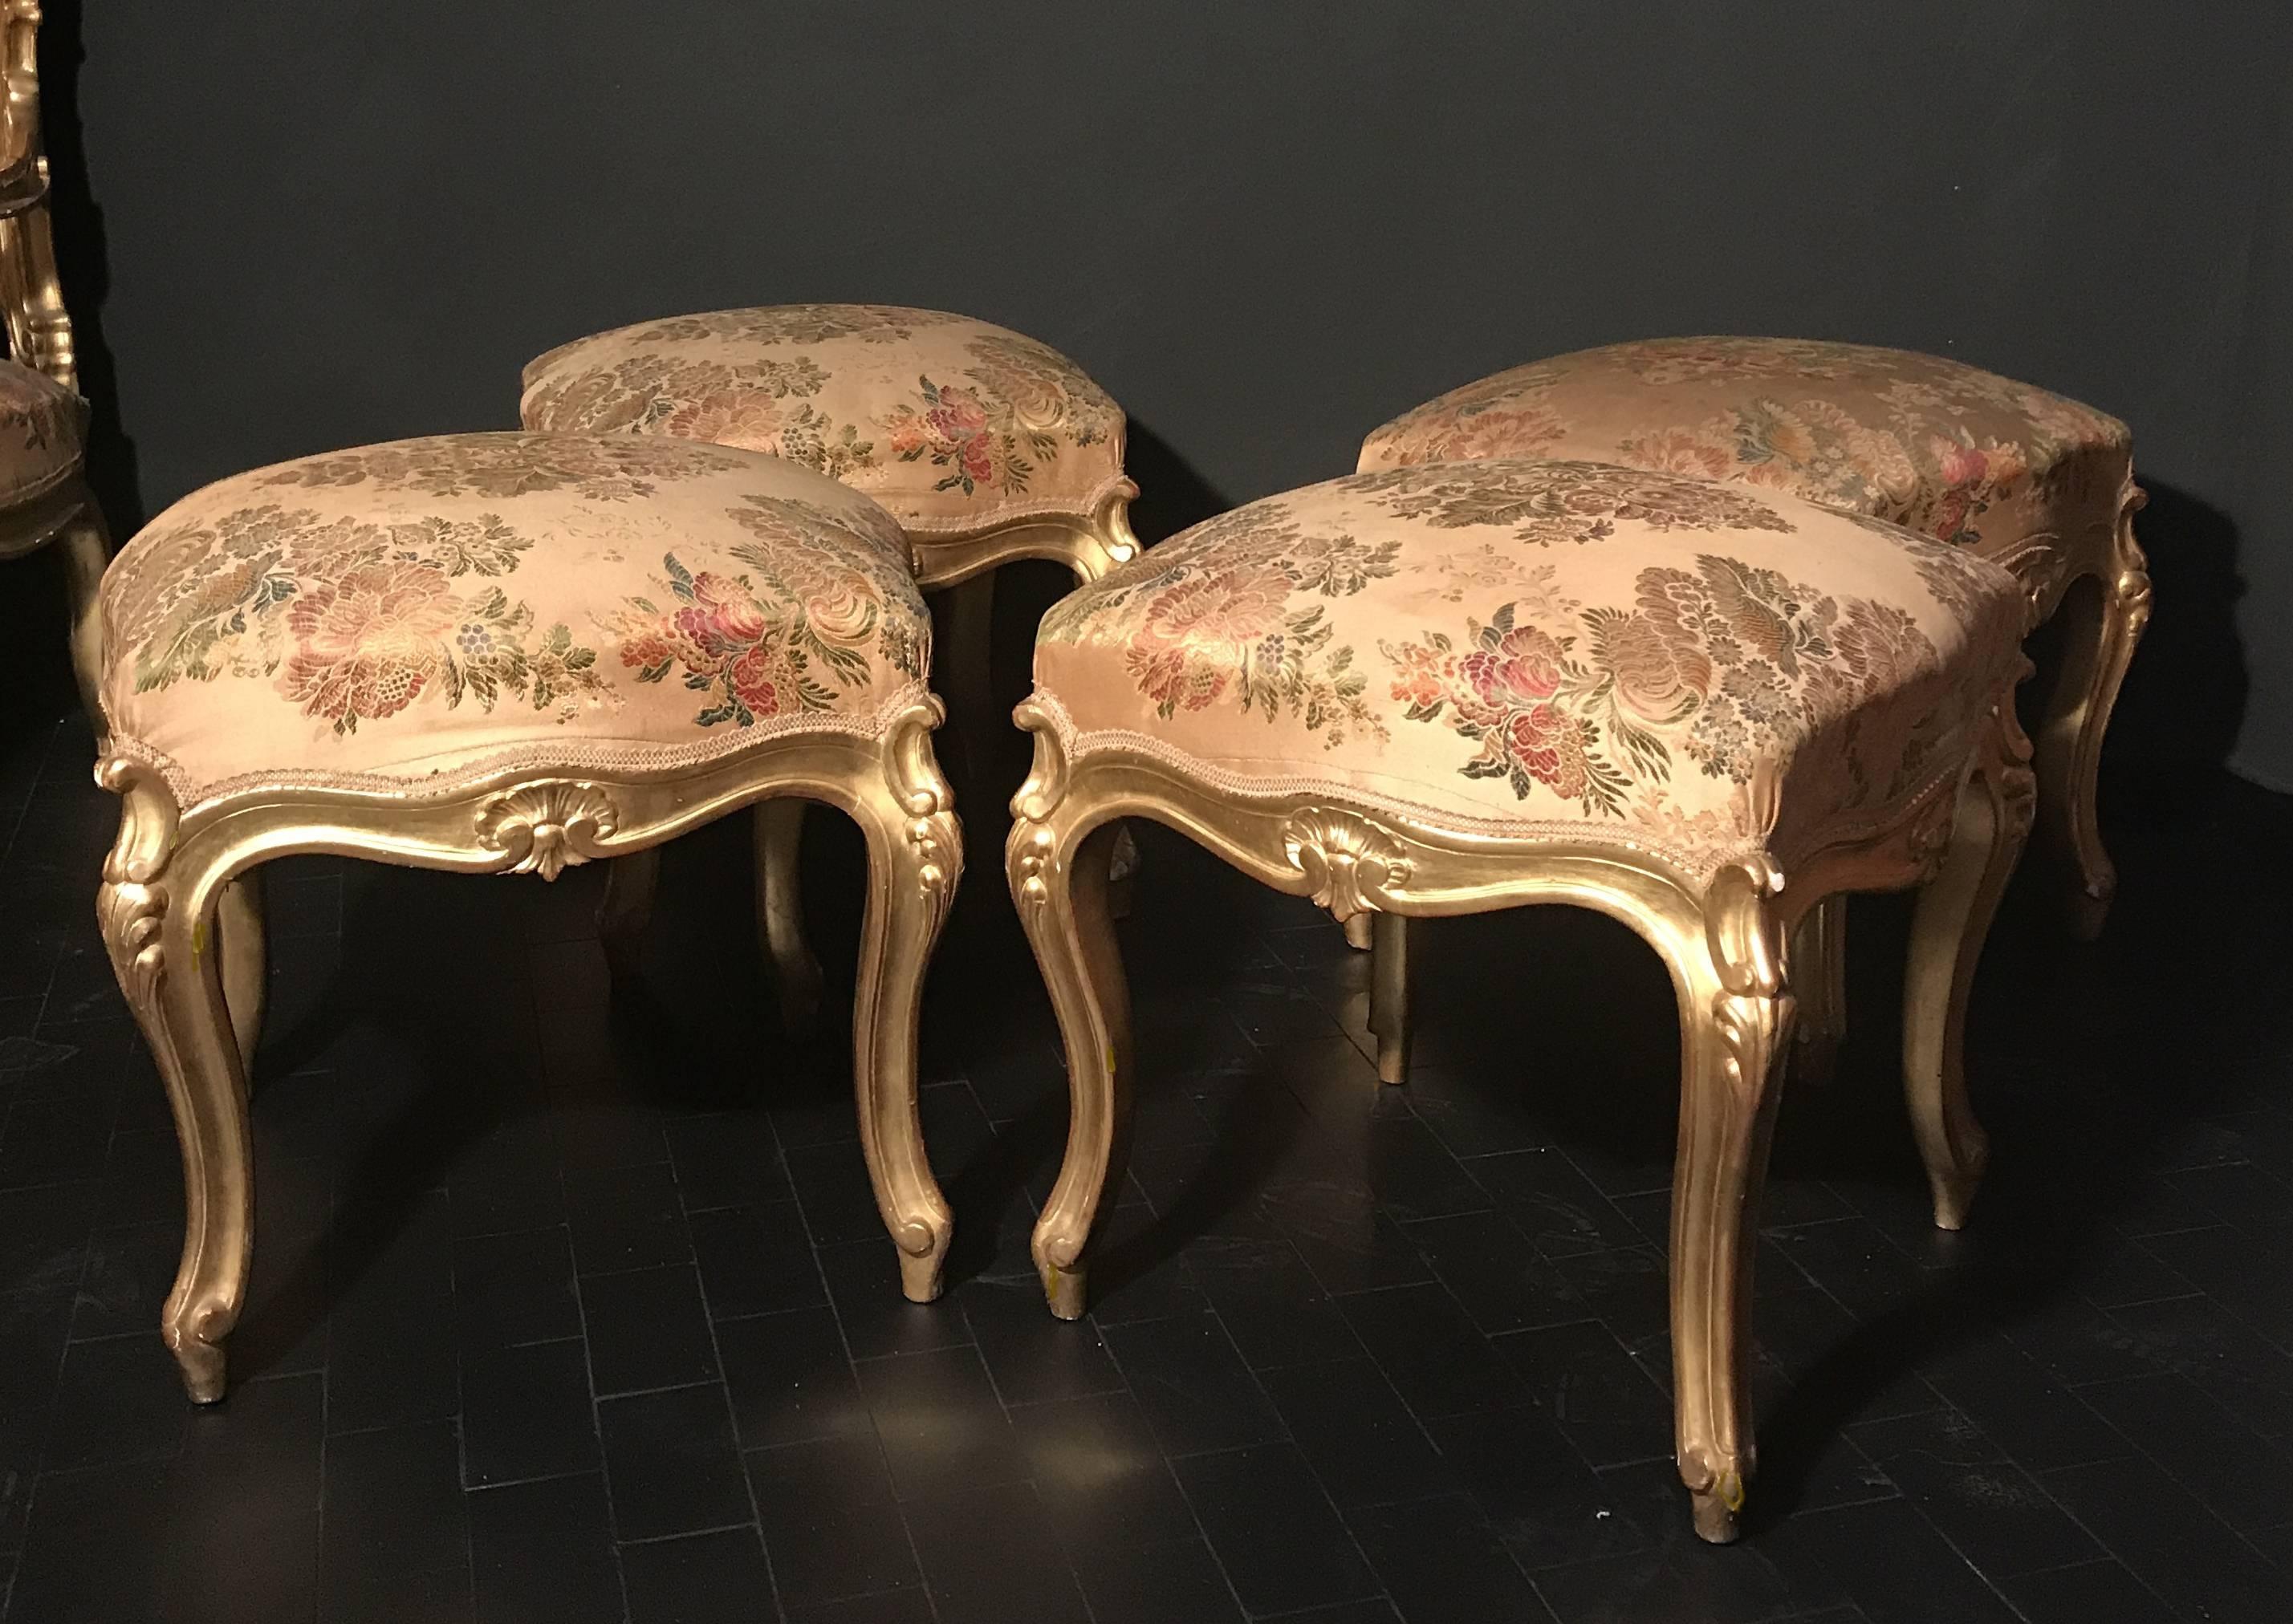 Rare Set of Four Giltwood Stools, Italy, 19th Century For Sale 1